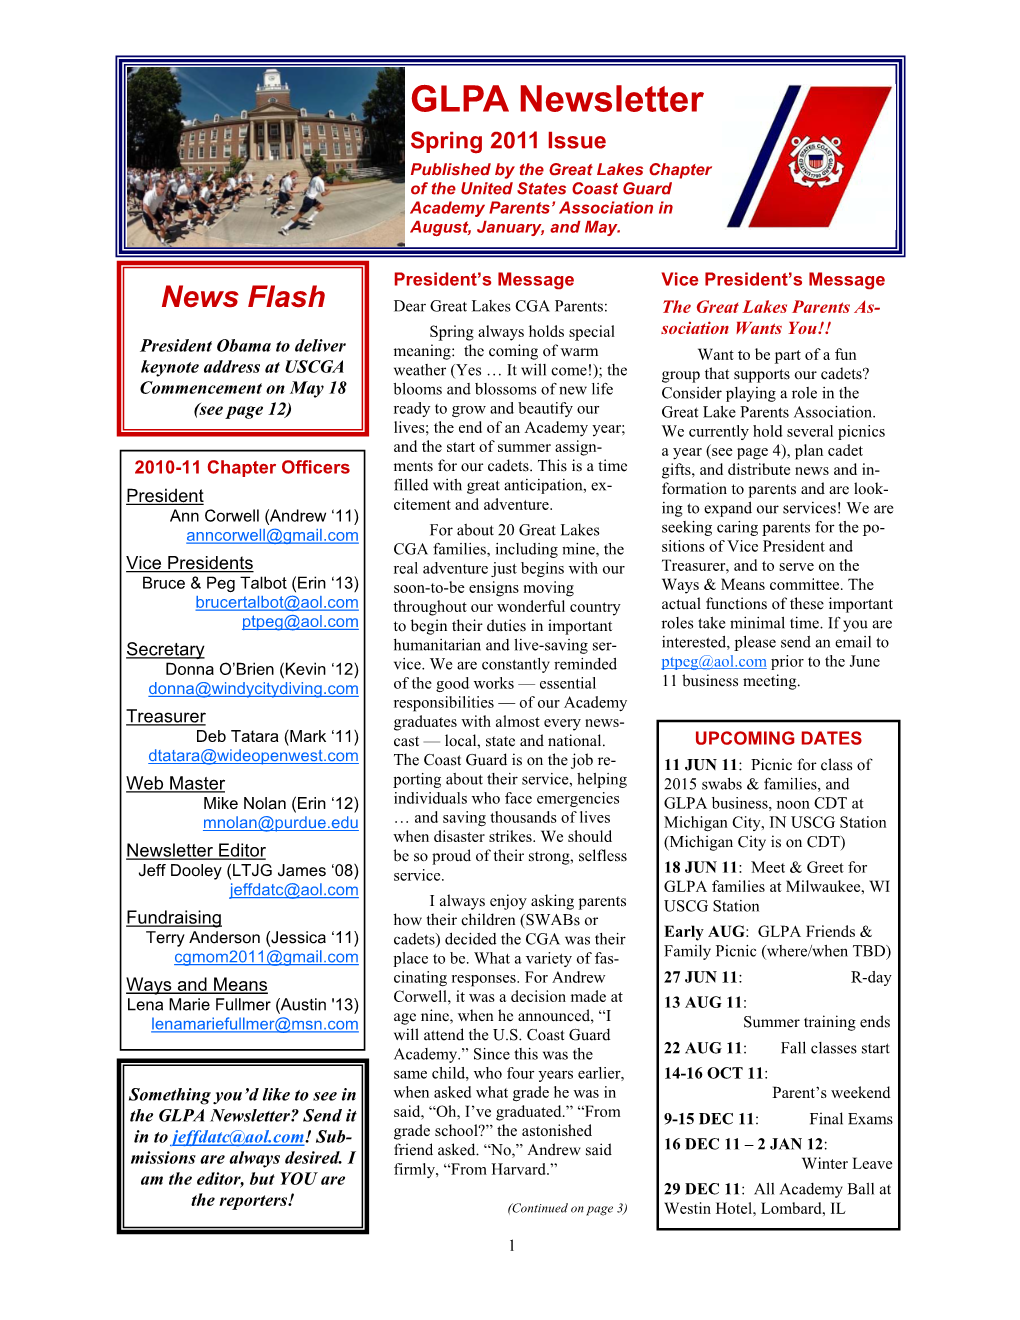 GLPA Newsletter Spring 2011 Issue Published by the Great Lakes Chapter of the United States Coast Guard Academy Parents’ Association in August, January, and May